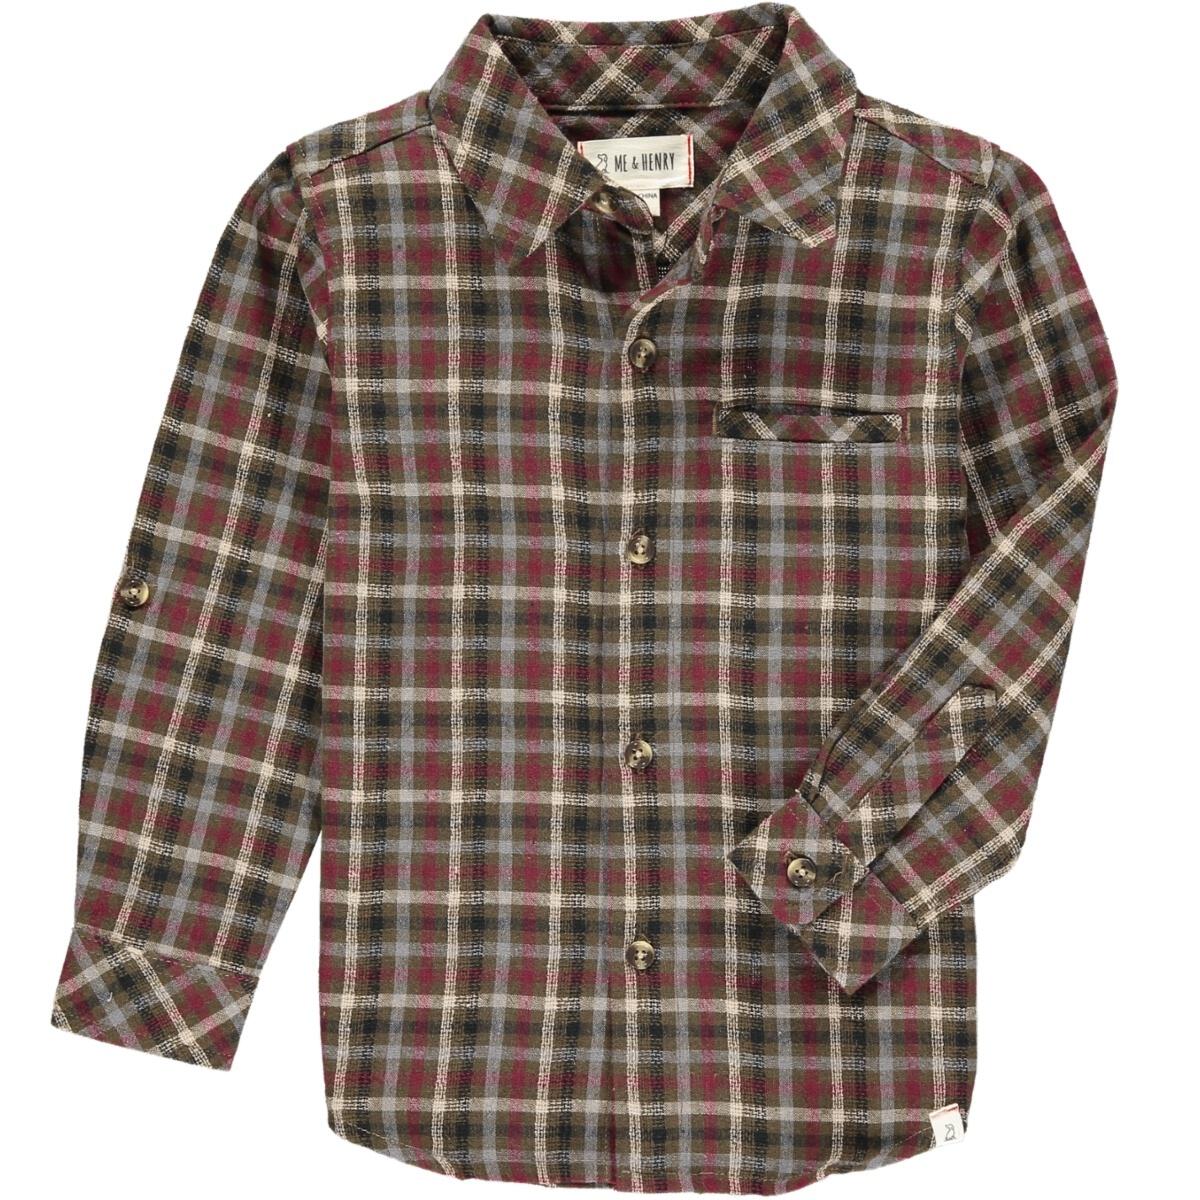 ATWOOD WOVEN SHIRT - BROWN/BEIGE PLAID